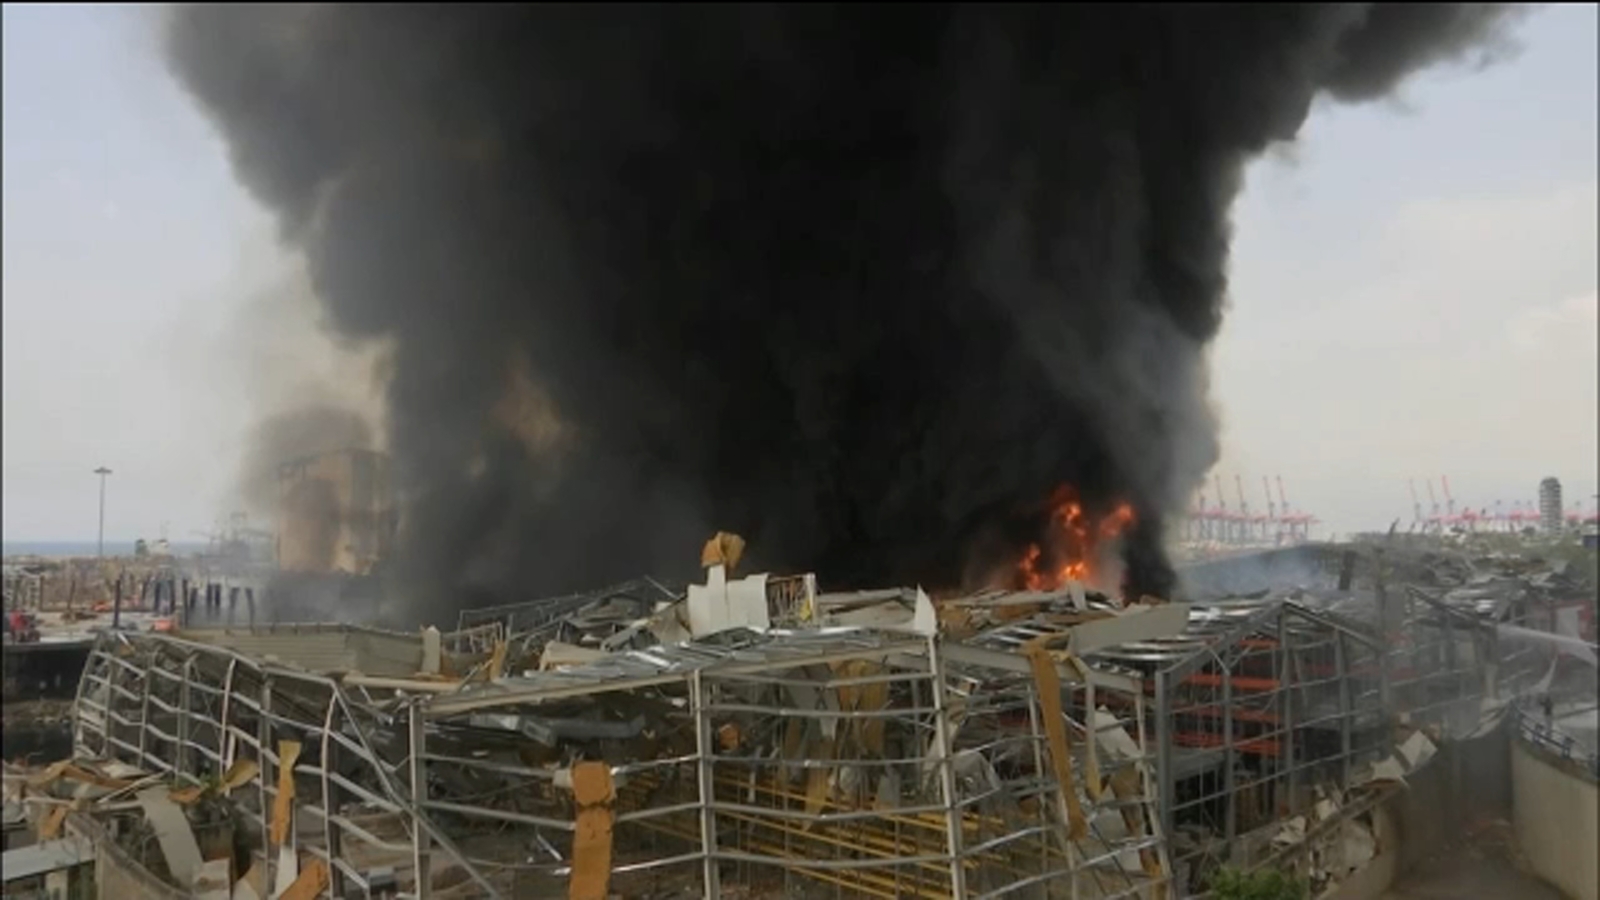 Huge fire breaks out at Beirut port a month after explosion